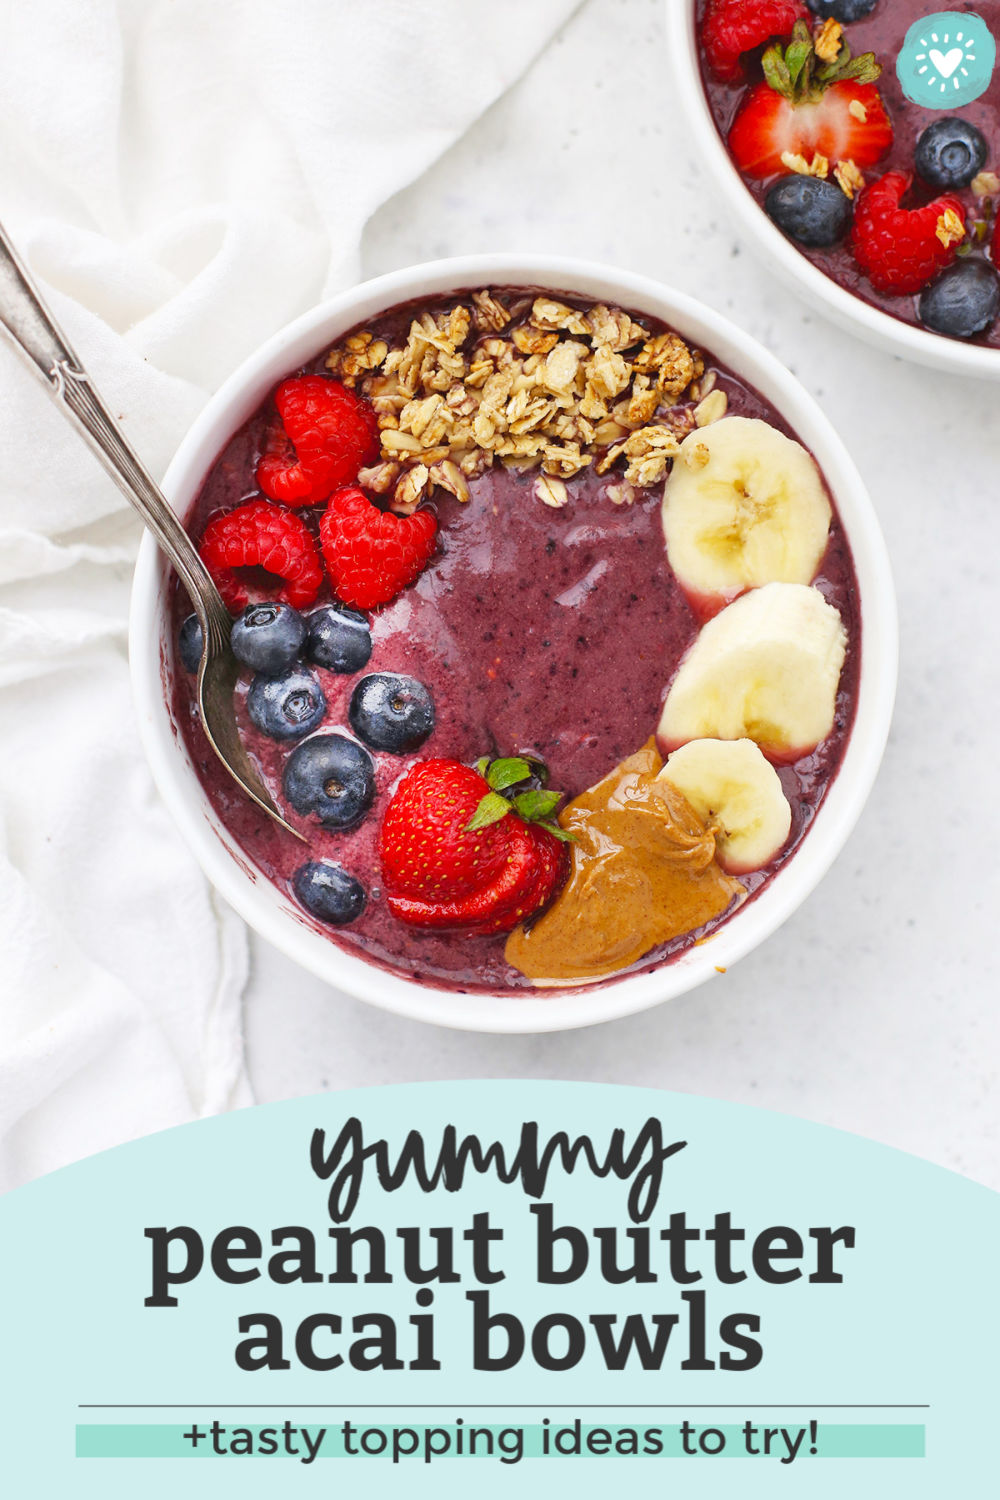 Peanut Butter Acai Bowl on a white background with a text overlay that reads "Yummy Peanut Butter Acai Bowls + Tasty Topping Ideas to Try!"